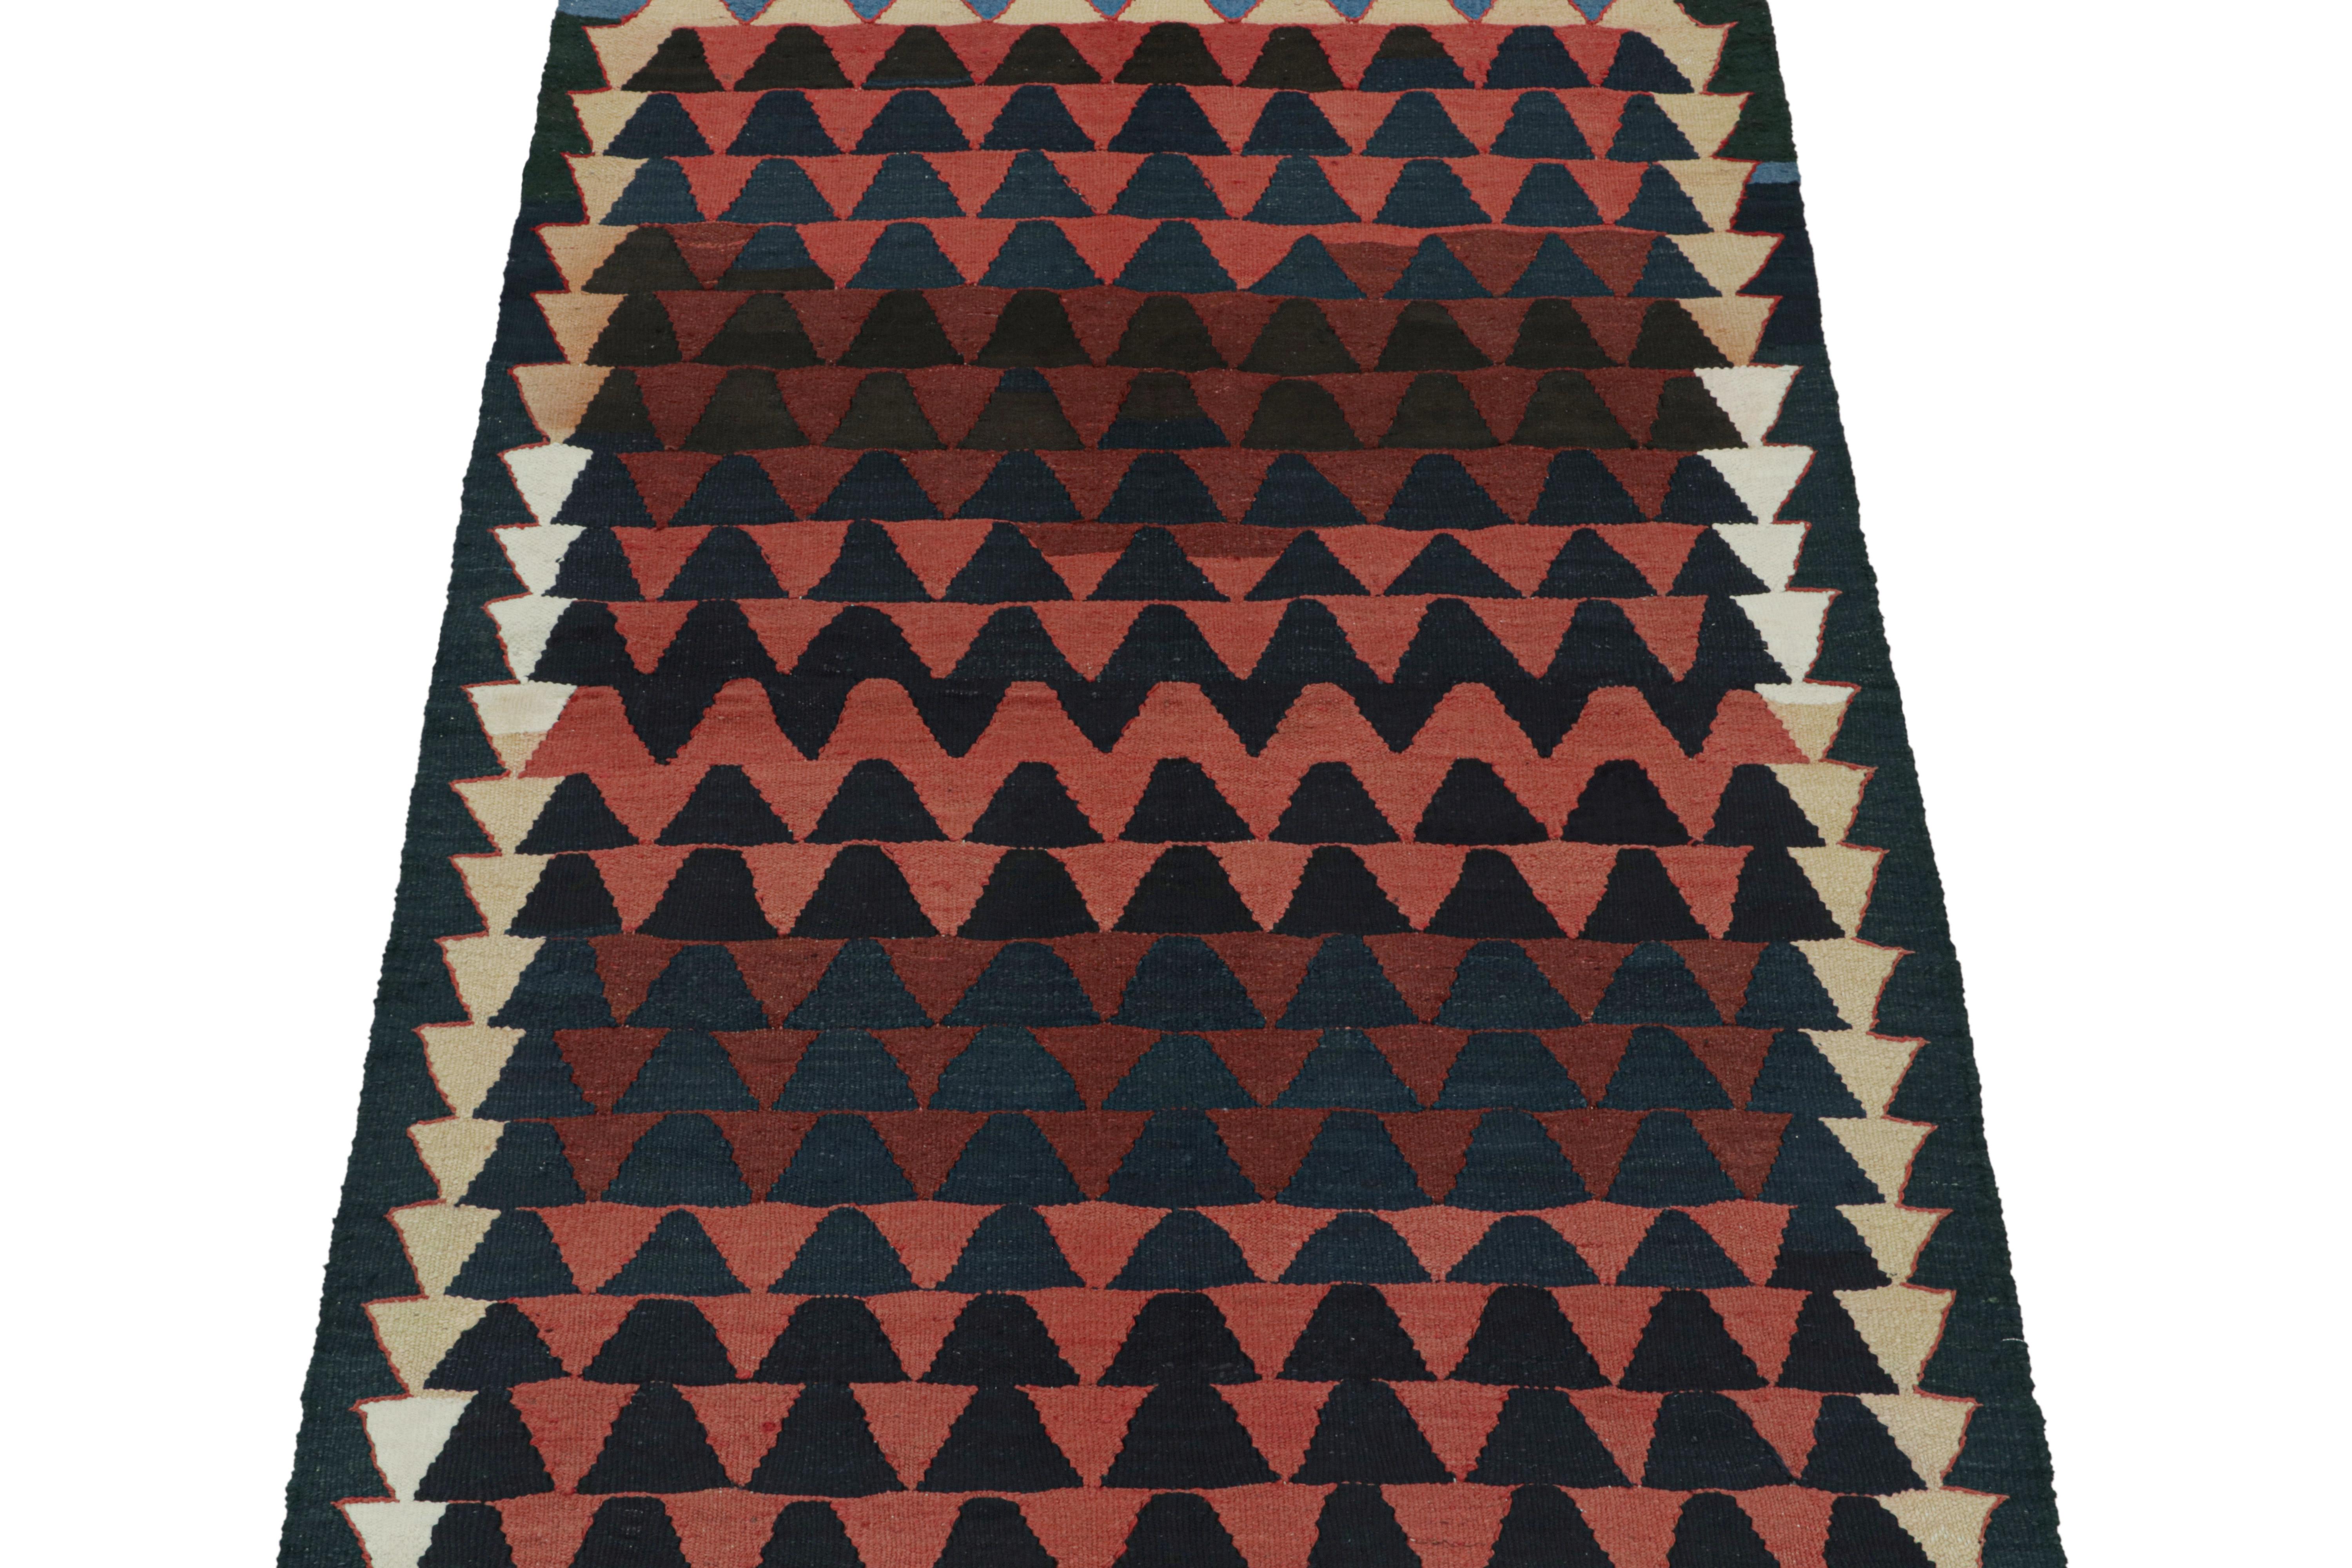 This vintage 5x8 Persian Kilim is believed to be a midcentury tribal rug from Kurdistan.

Handwoven in wool circa 1950-1960, its design favors an all-over geometric pattern in repeat rows with navy blue and red. Keen eyes will further note